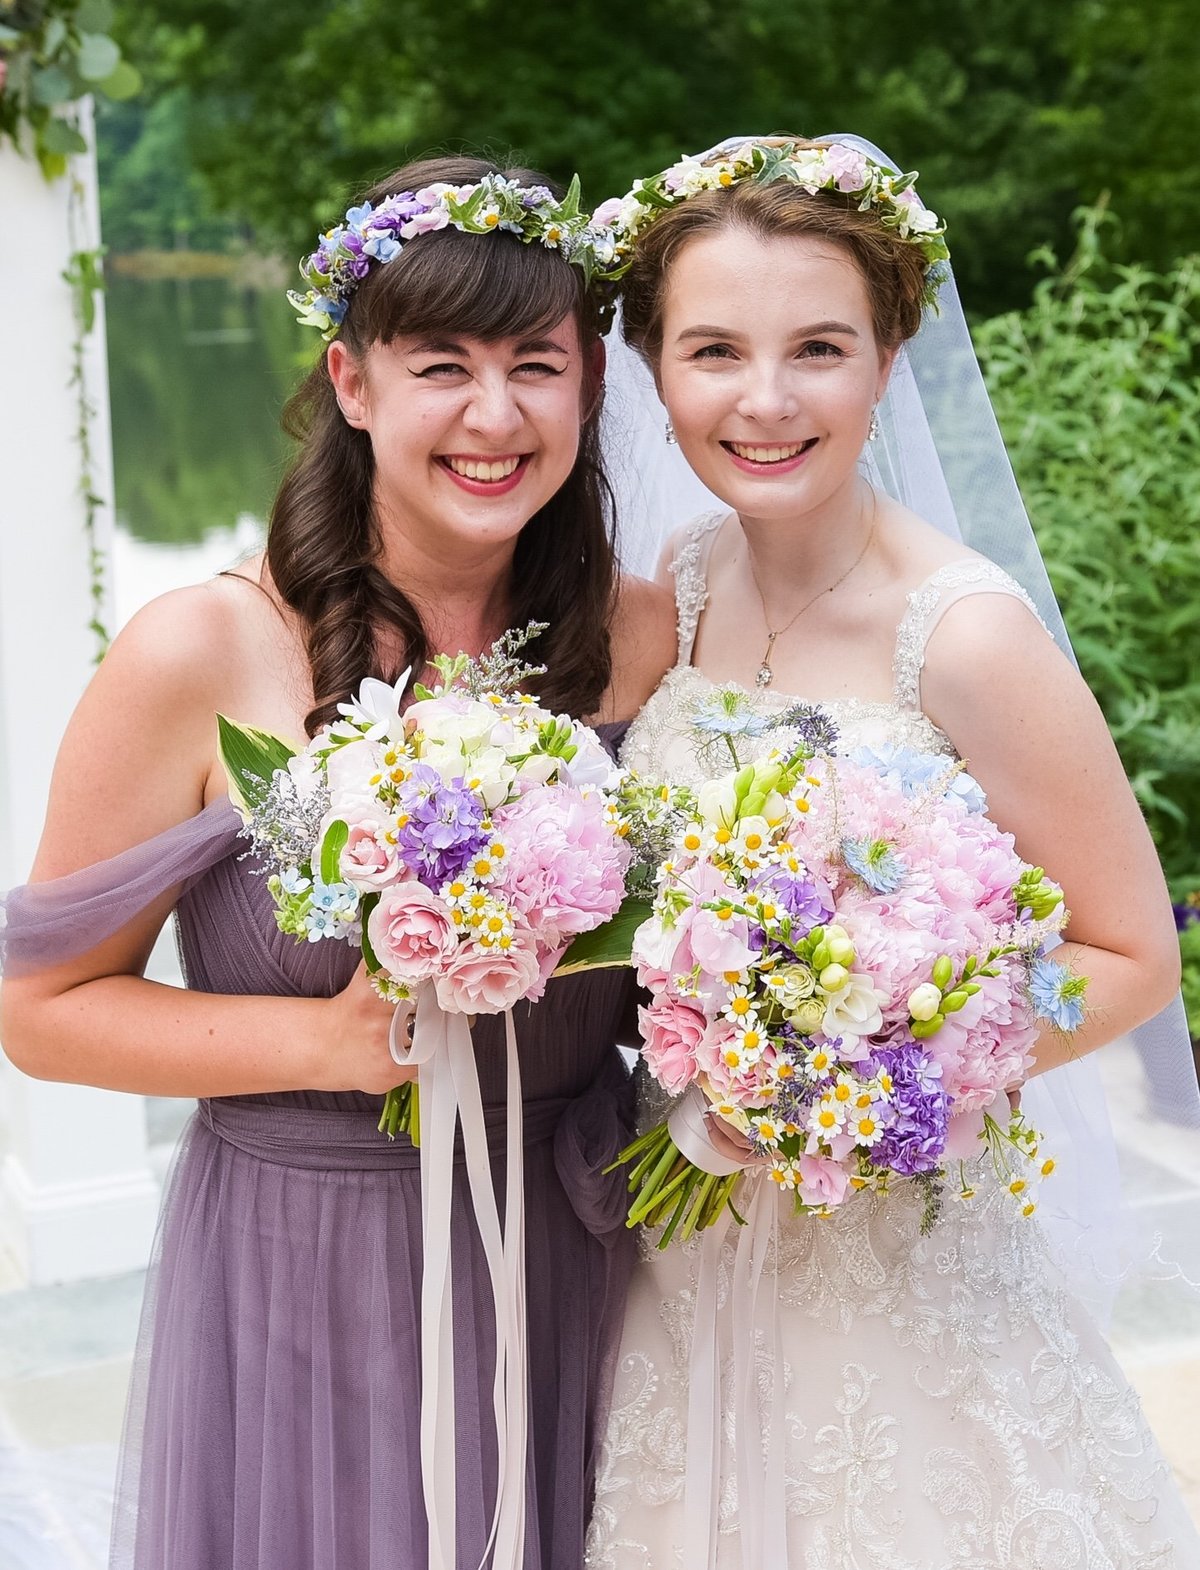 Bride and bridesmaids with pastel bouquets and matching flower crowns for a backyard wedding in spring